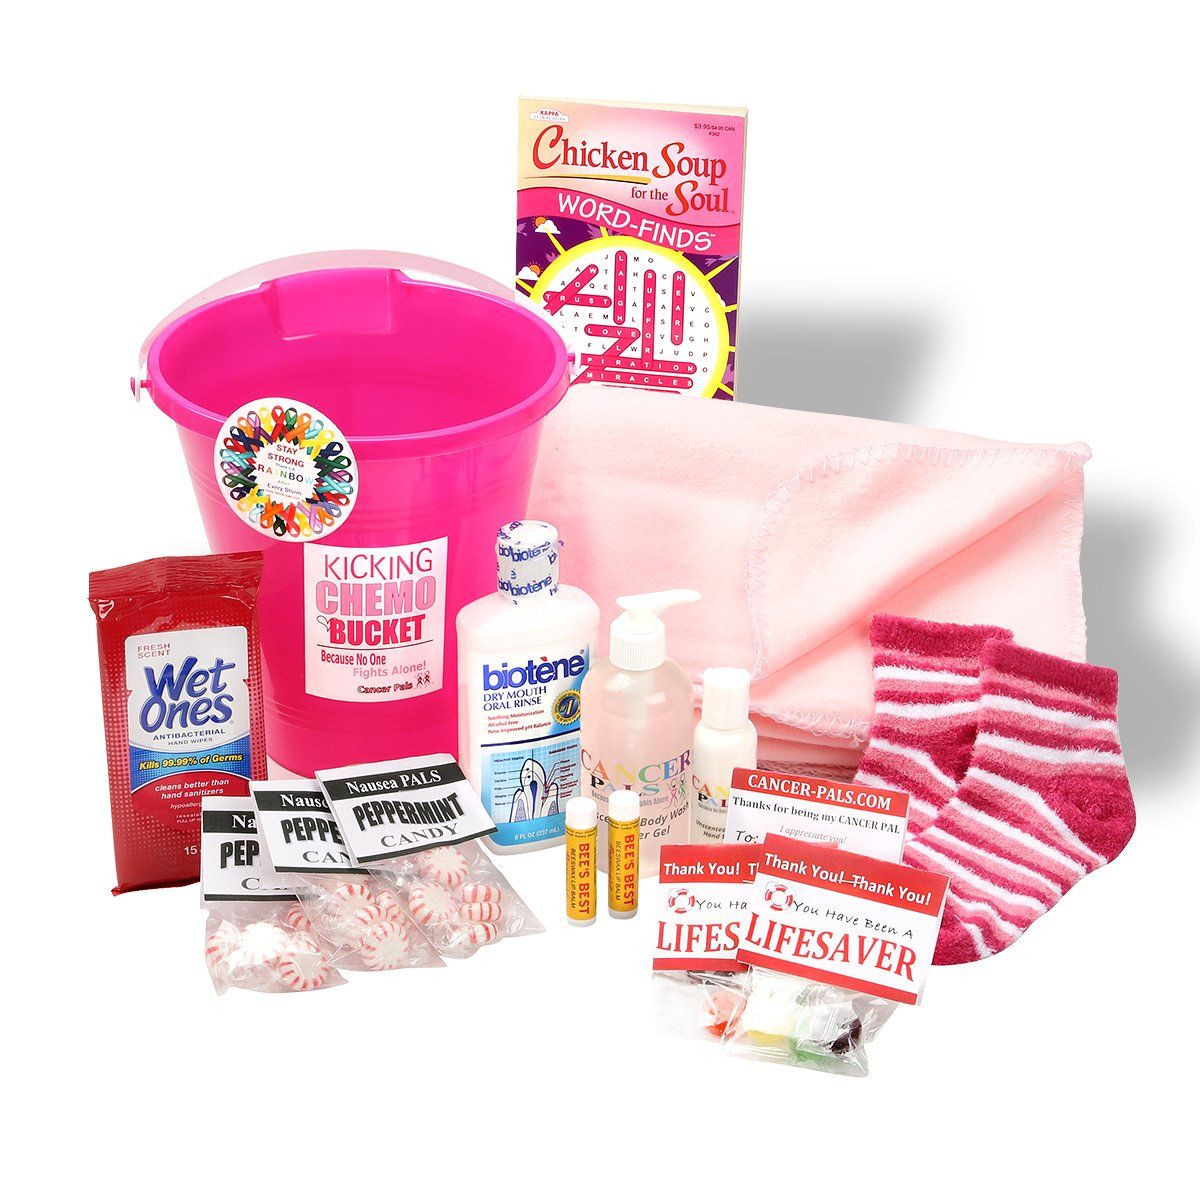 Breast Cancer Gift Basket Ideas
 The top 22 Ideas About Gift Basket Ideas for Breast Cancer